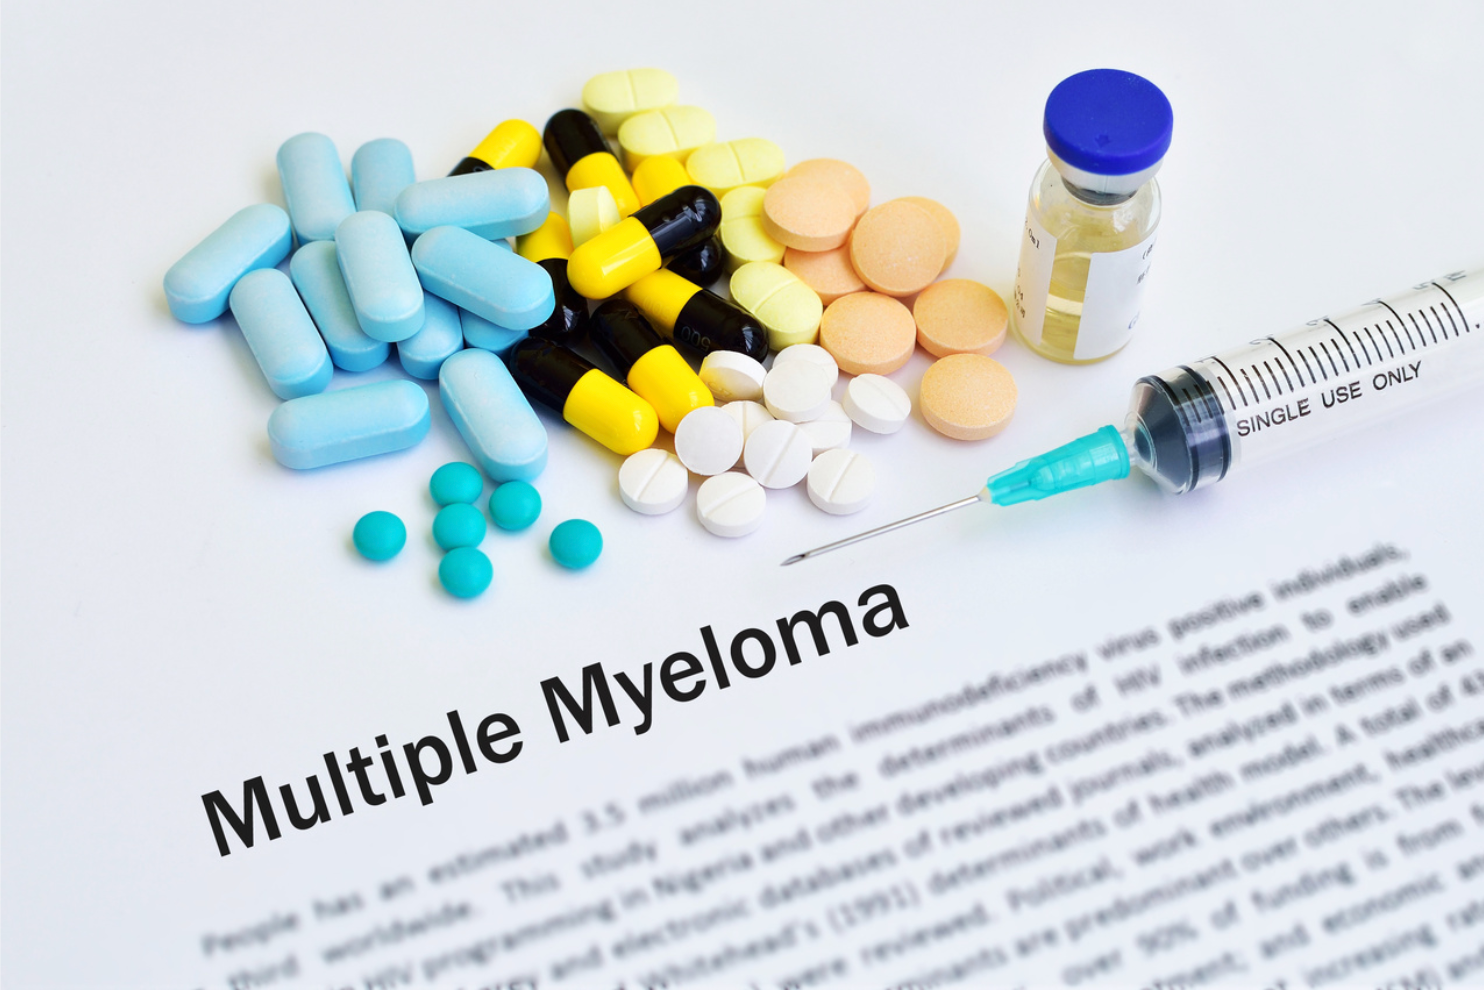 Research Continues Evaluating Belantamab Mafodotin in Relapsed/Refractory Multiple Myeloma